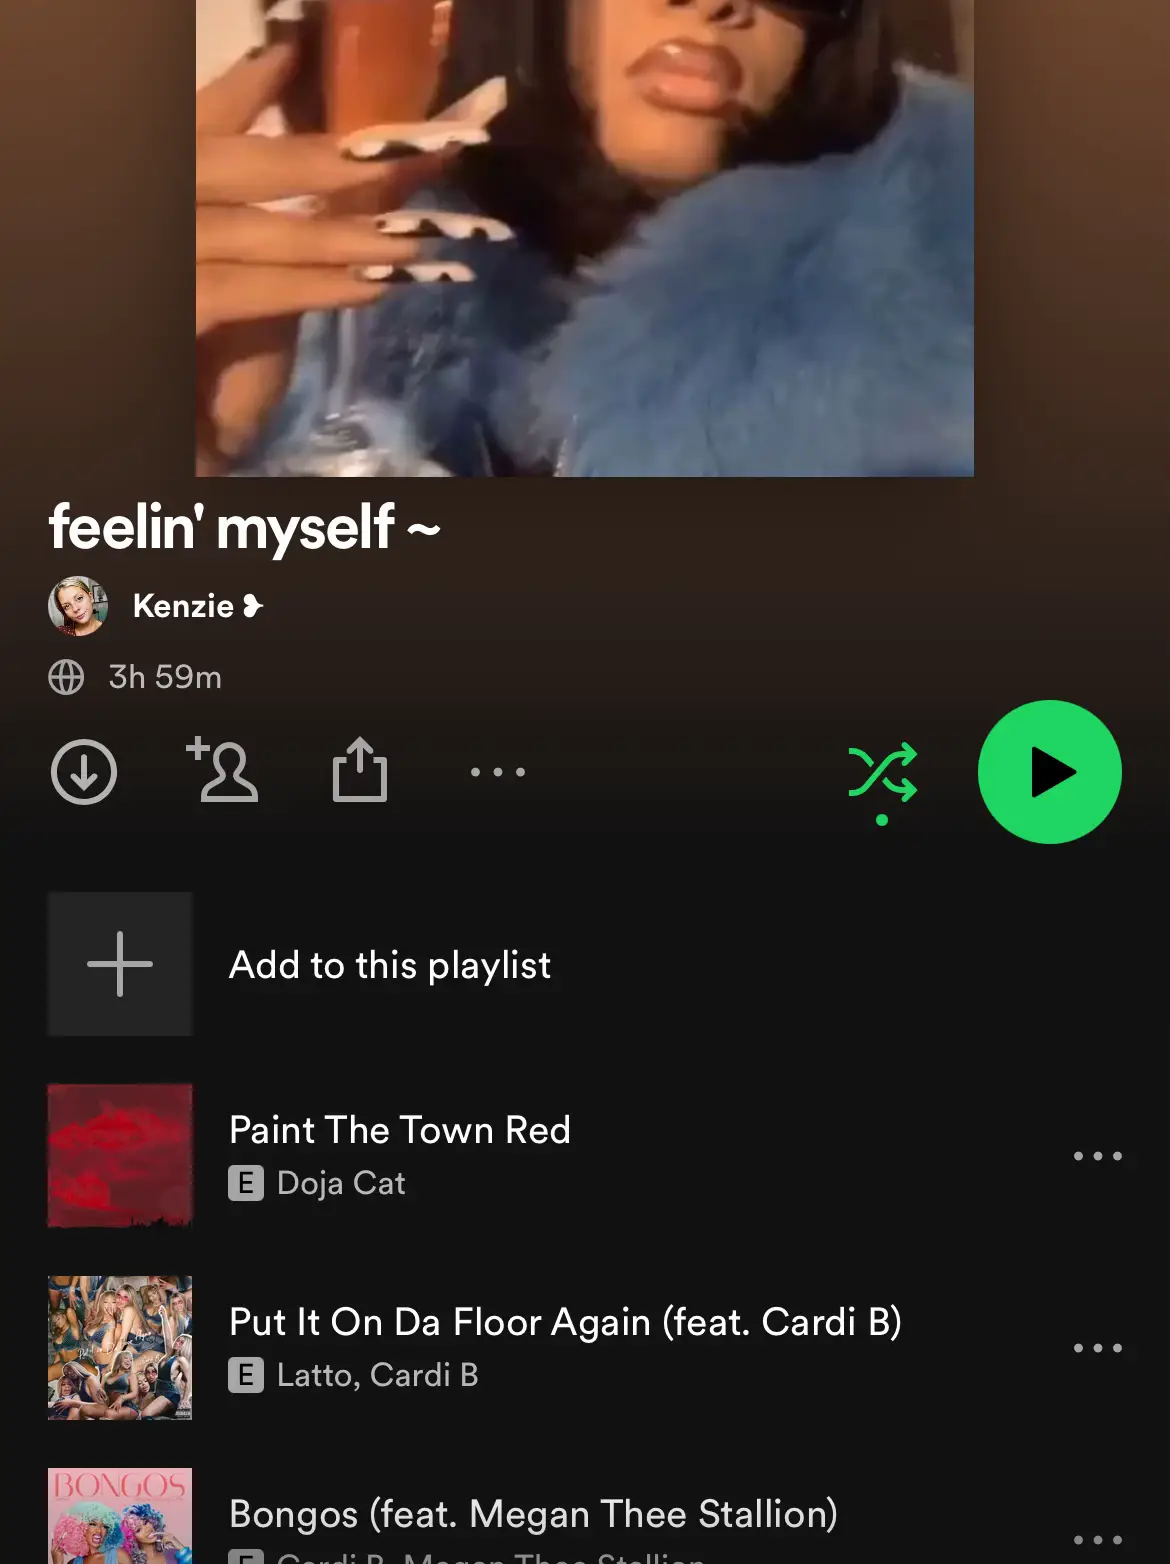  A playlist of music with the words "feelin' myself" at the top.